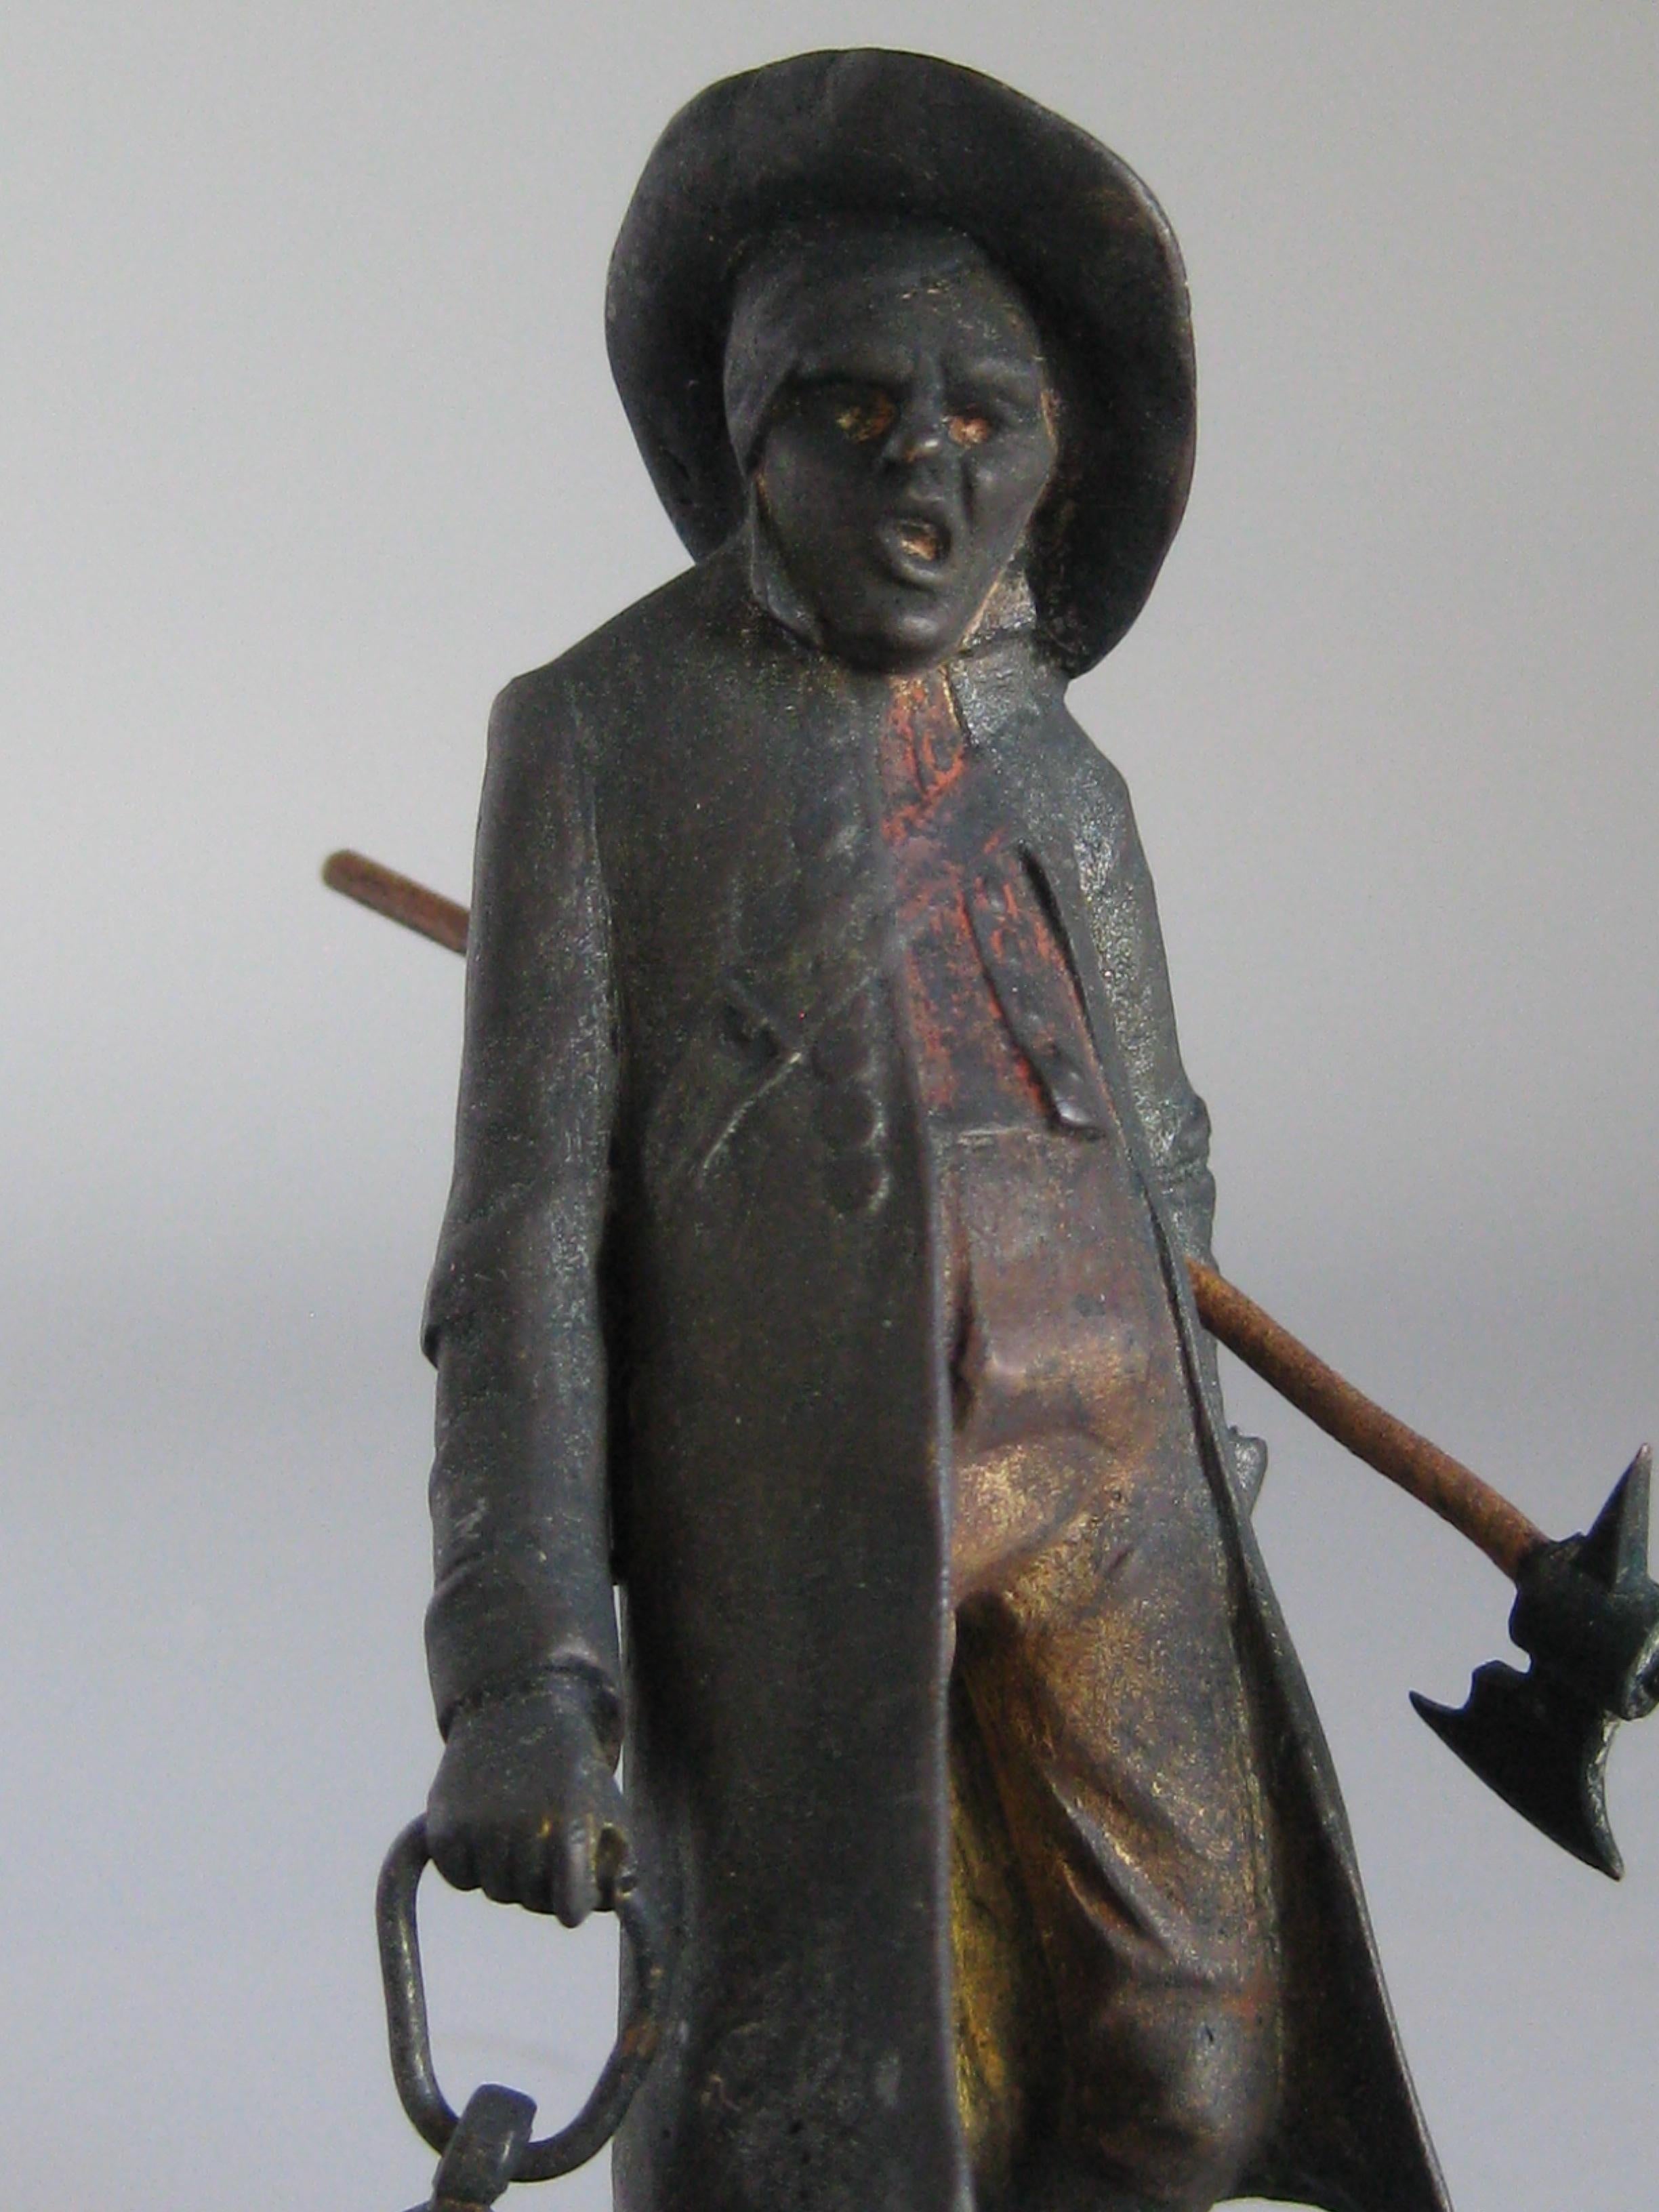 Very tough to find Vienna bronze of a night watchman and is by Franz Bergman. The bronze figure dates from the late 1800s-early 1900s. Has cold paint accents. The lantern in his hand swings. Great detail and is marked on the bottom with the makers